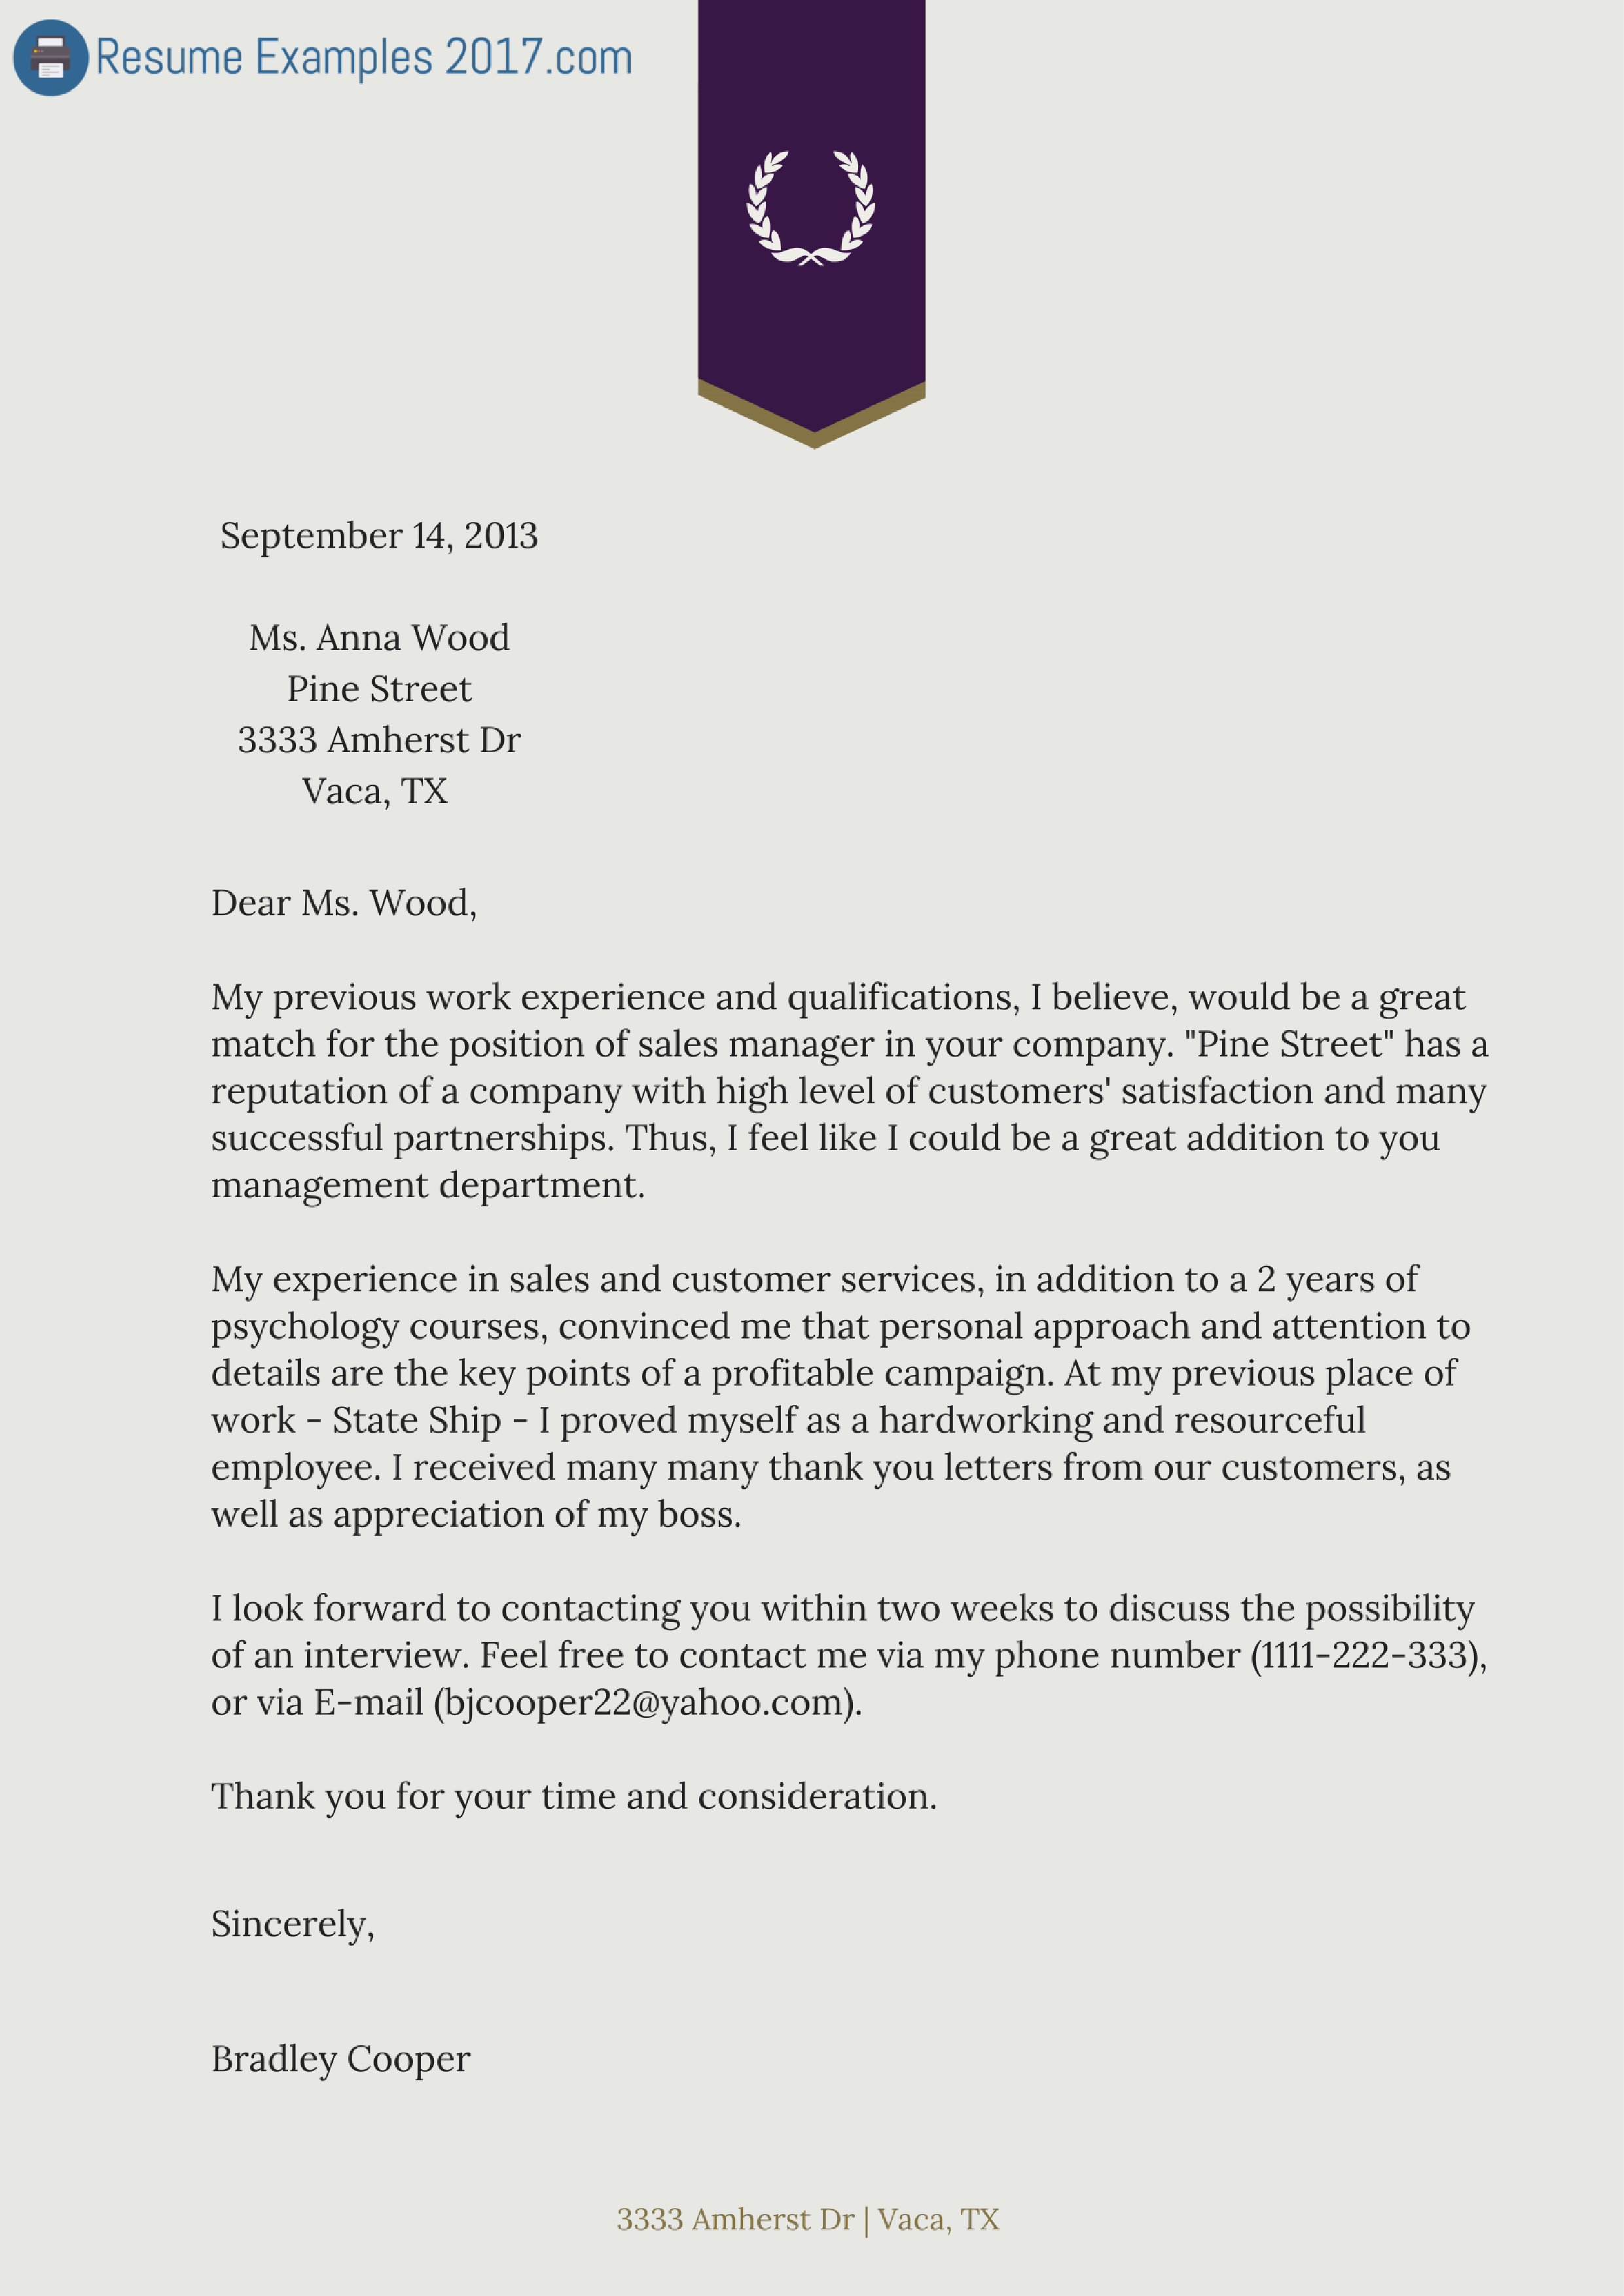 examples of a cover letter formal business letter format templates